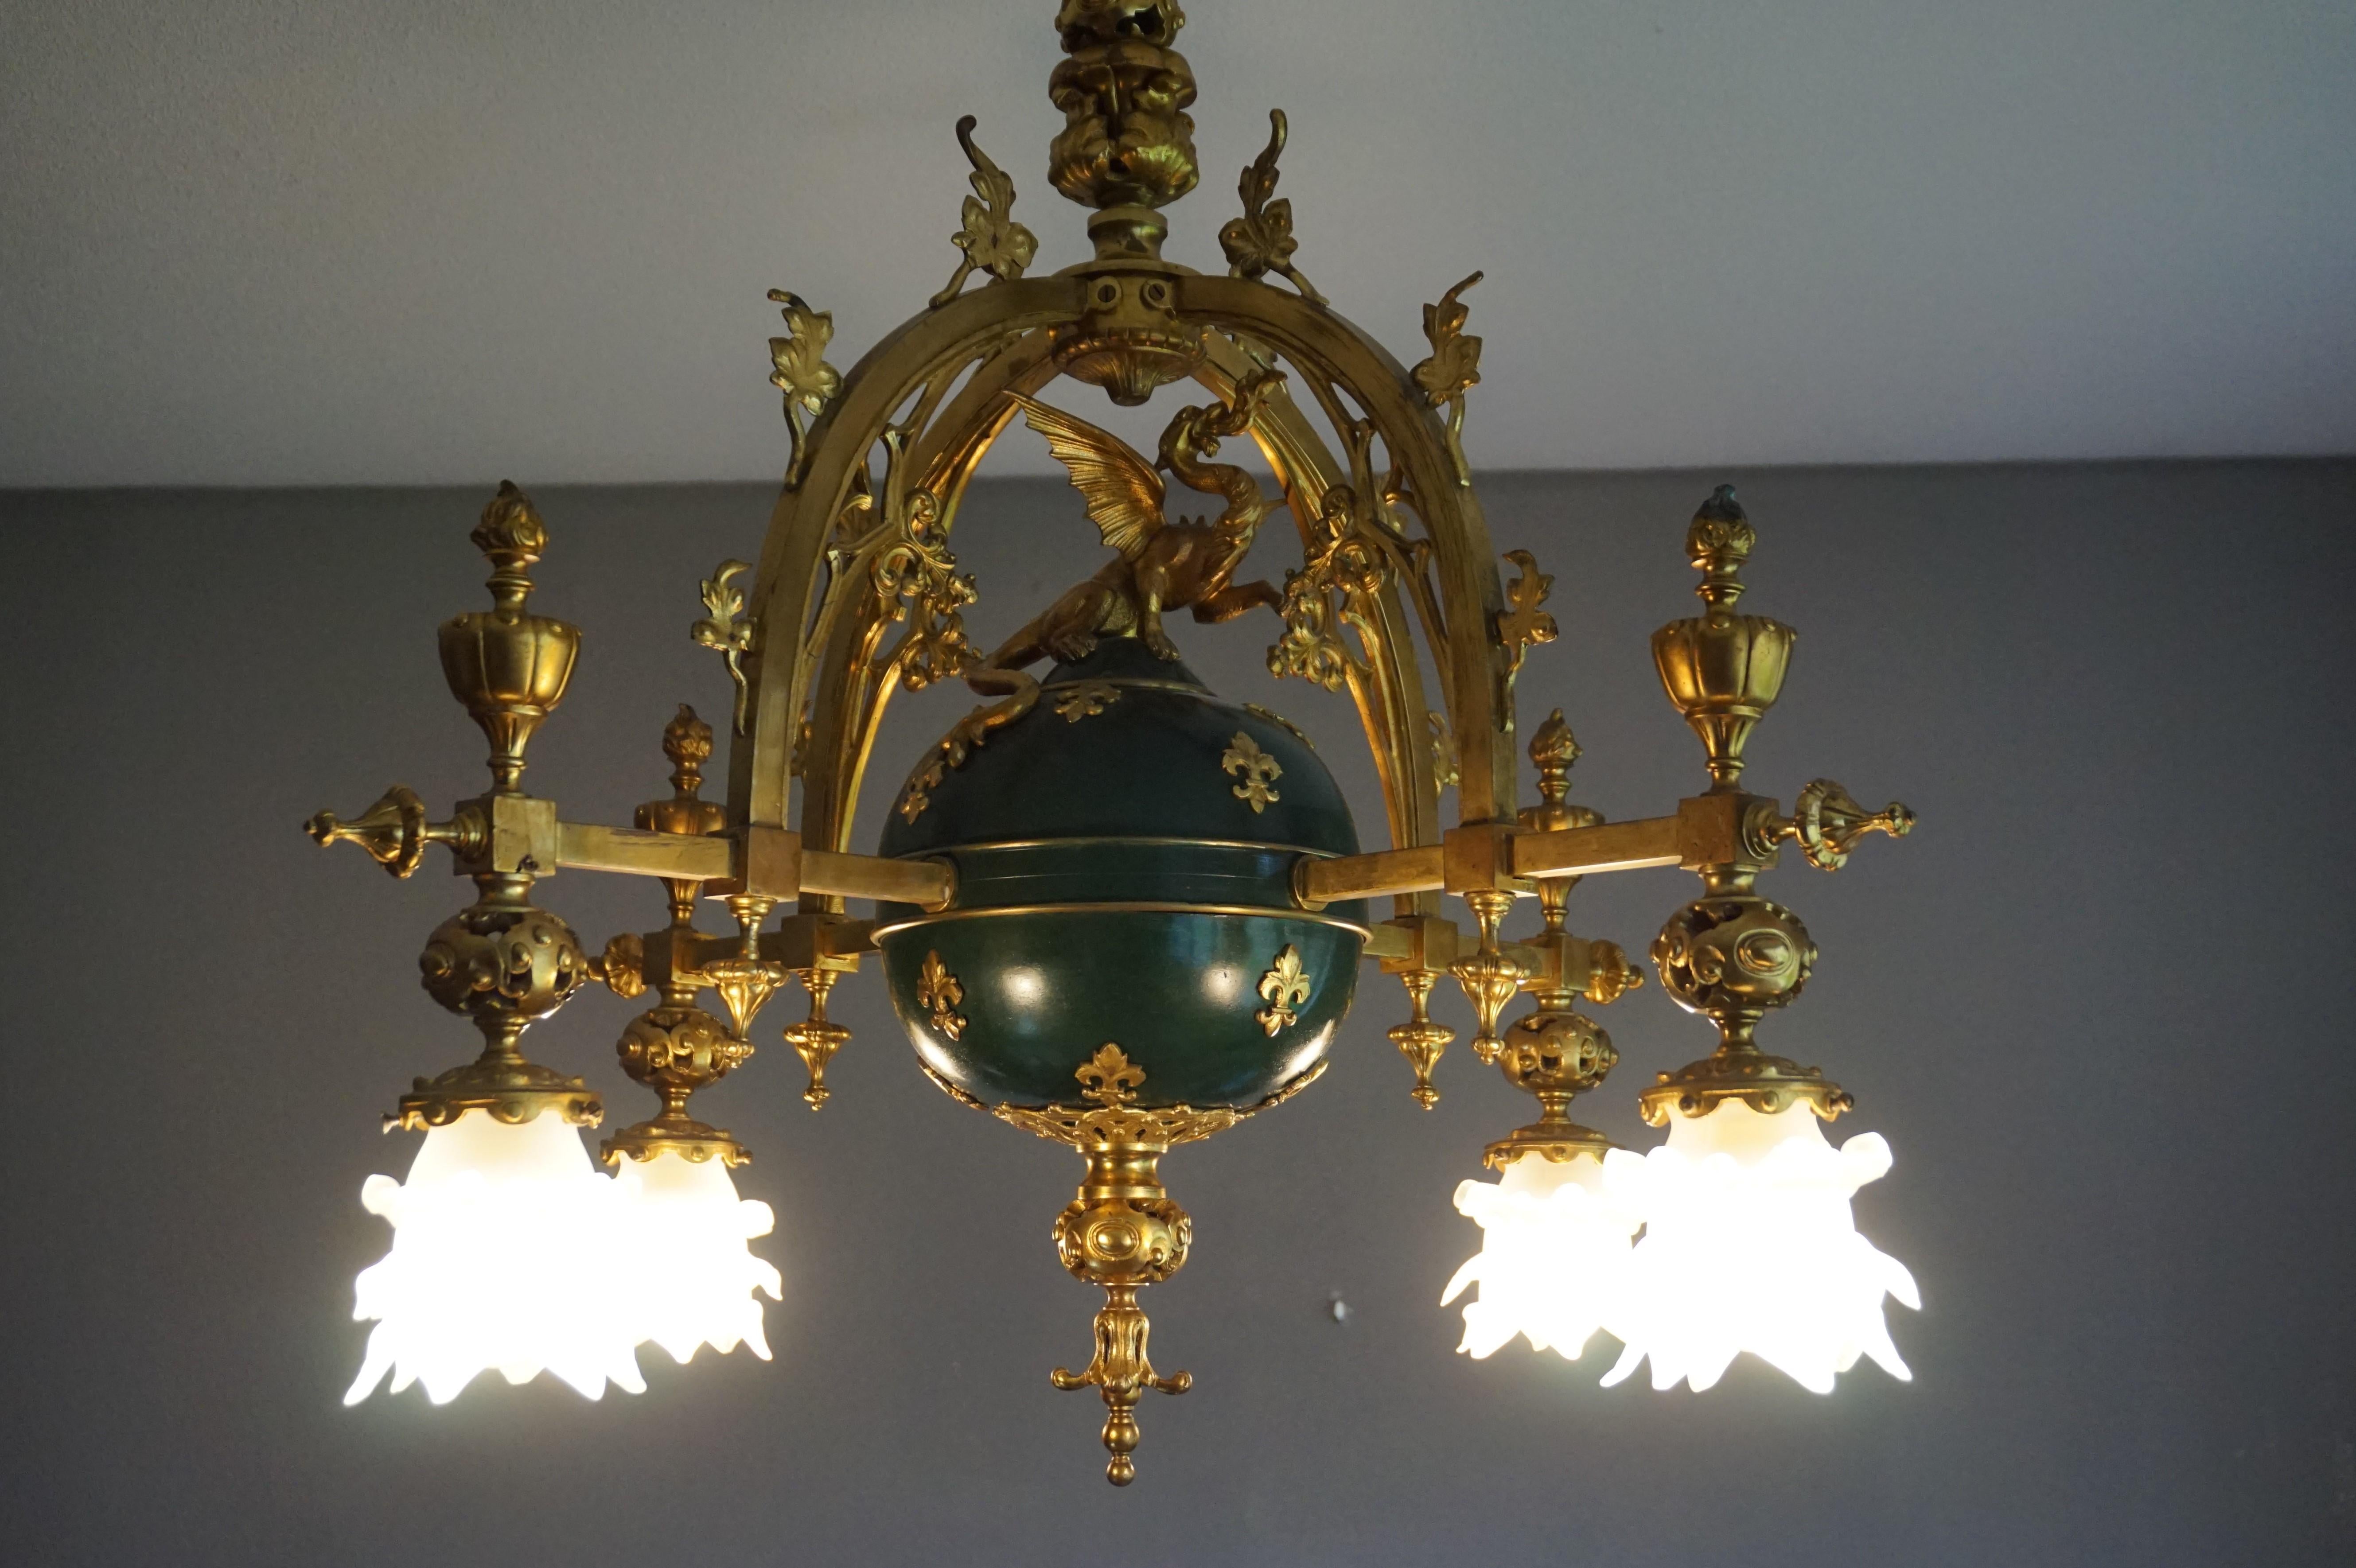 Stunning Gilt Bronze Gothic Revival Chandelier w. Dragon Sculpture & Glass Shade For Sale 8